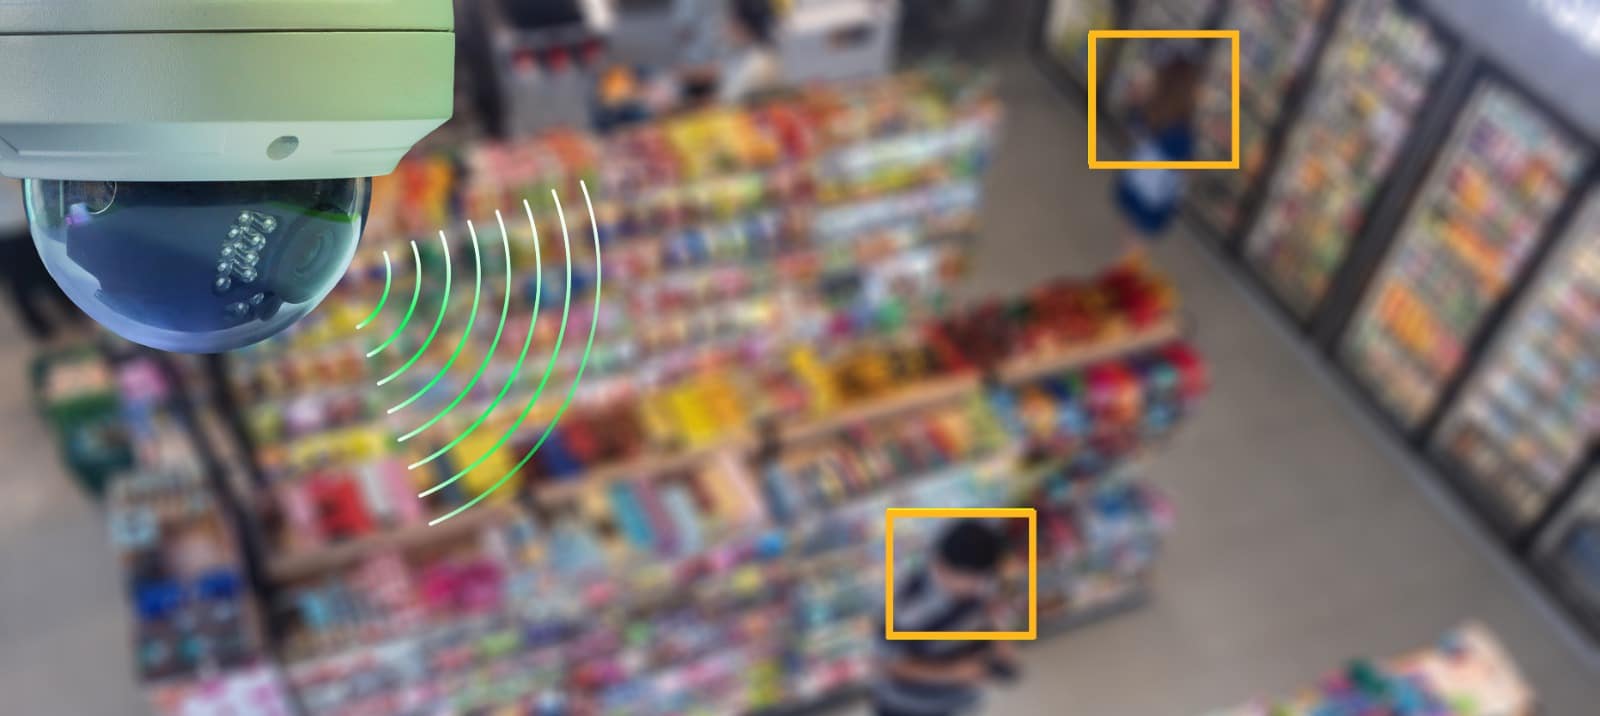 The Edge of Retail: Why Powerful Intelligent Vision is the Future of Brick & Mortar Stores